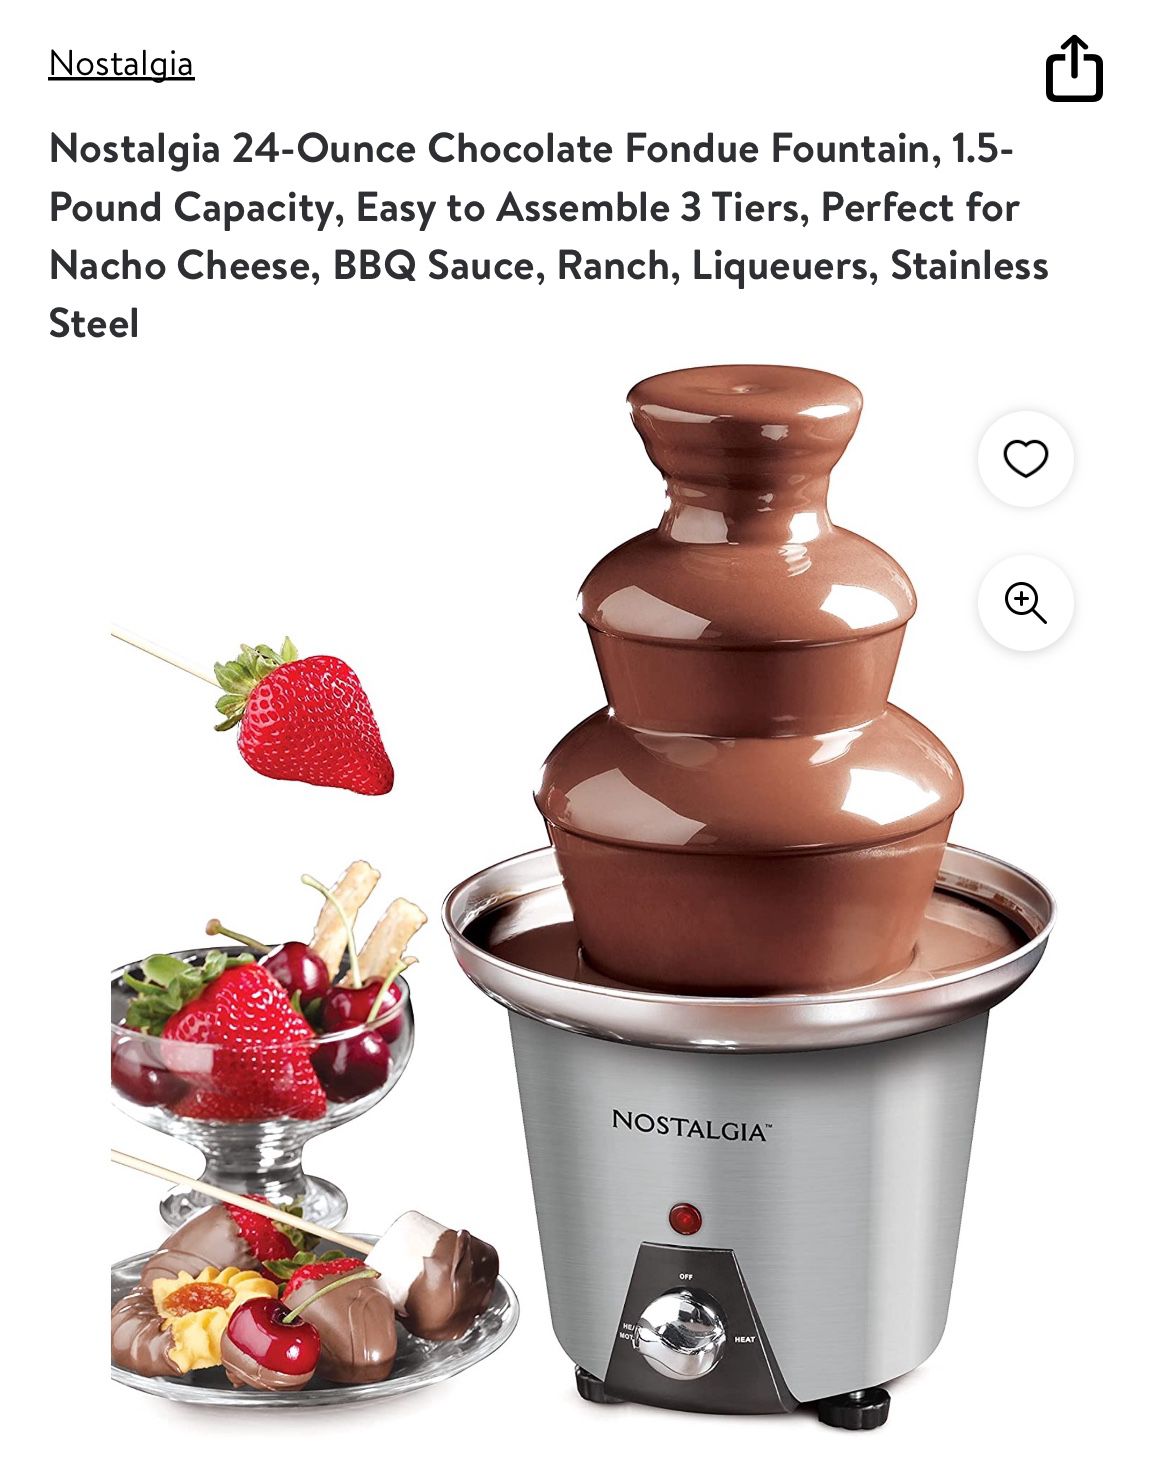 Nostalgia 24-Ounce Chocolate Fondue Fountain, 1.5-Pound Capacity, Easy to Assemble 3 Tiers, Perfect for Nacho Cheese, BBQ Sauce, Ranch, Liqueuers, Sta